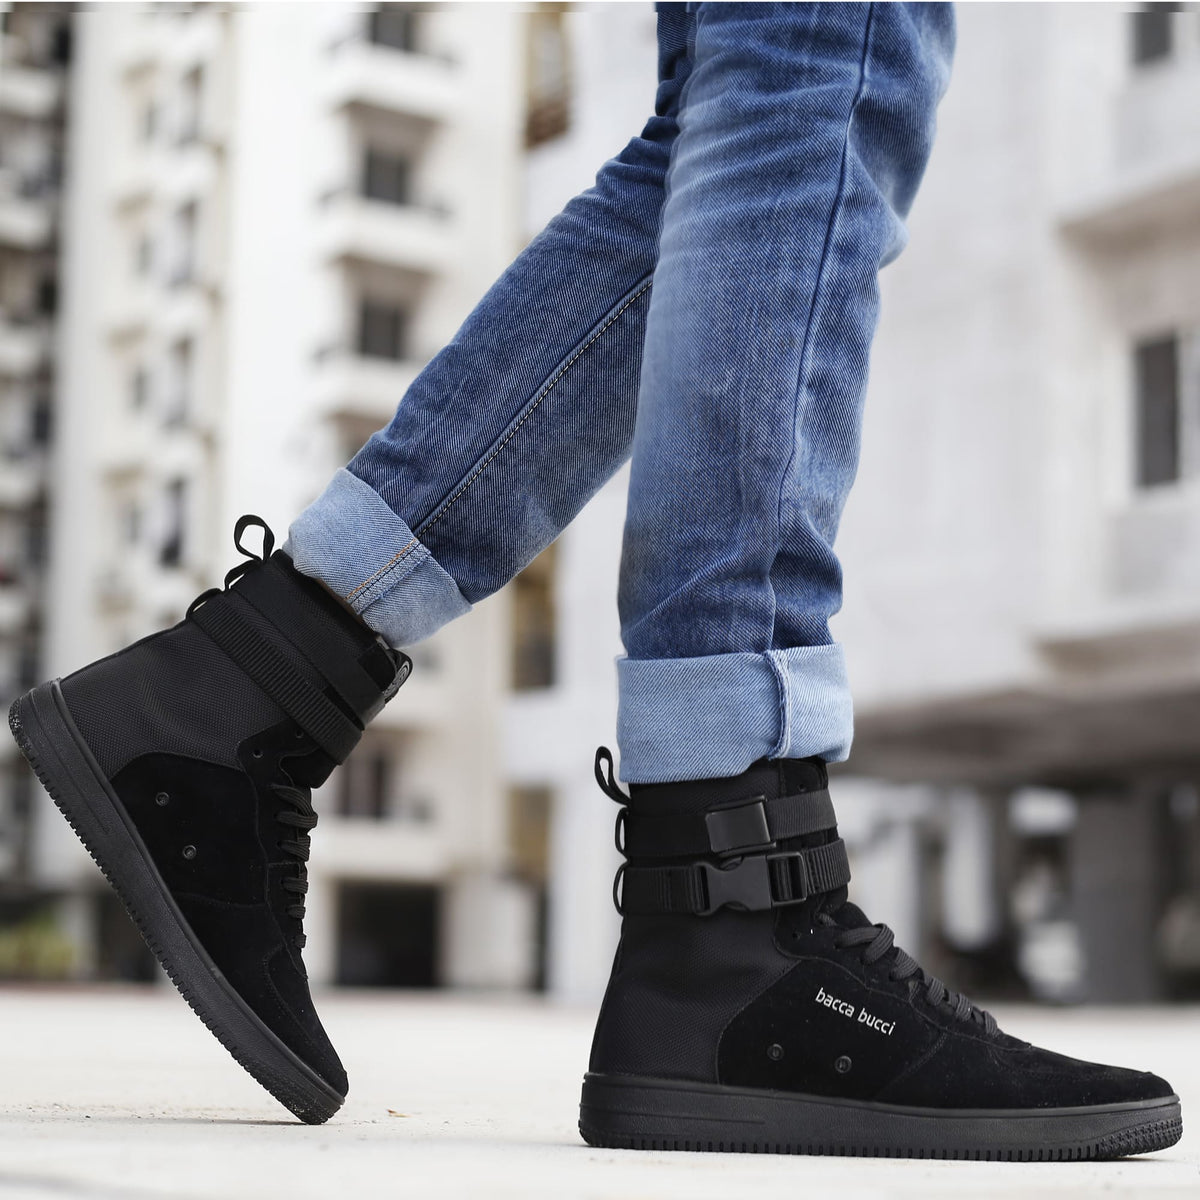 black sneakers for men, black casual shoes, black fashion sneakers for men, black hi top sneakers